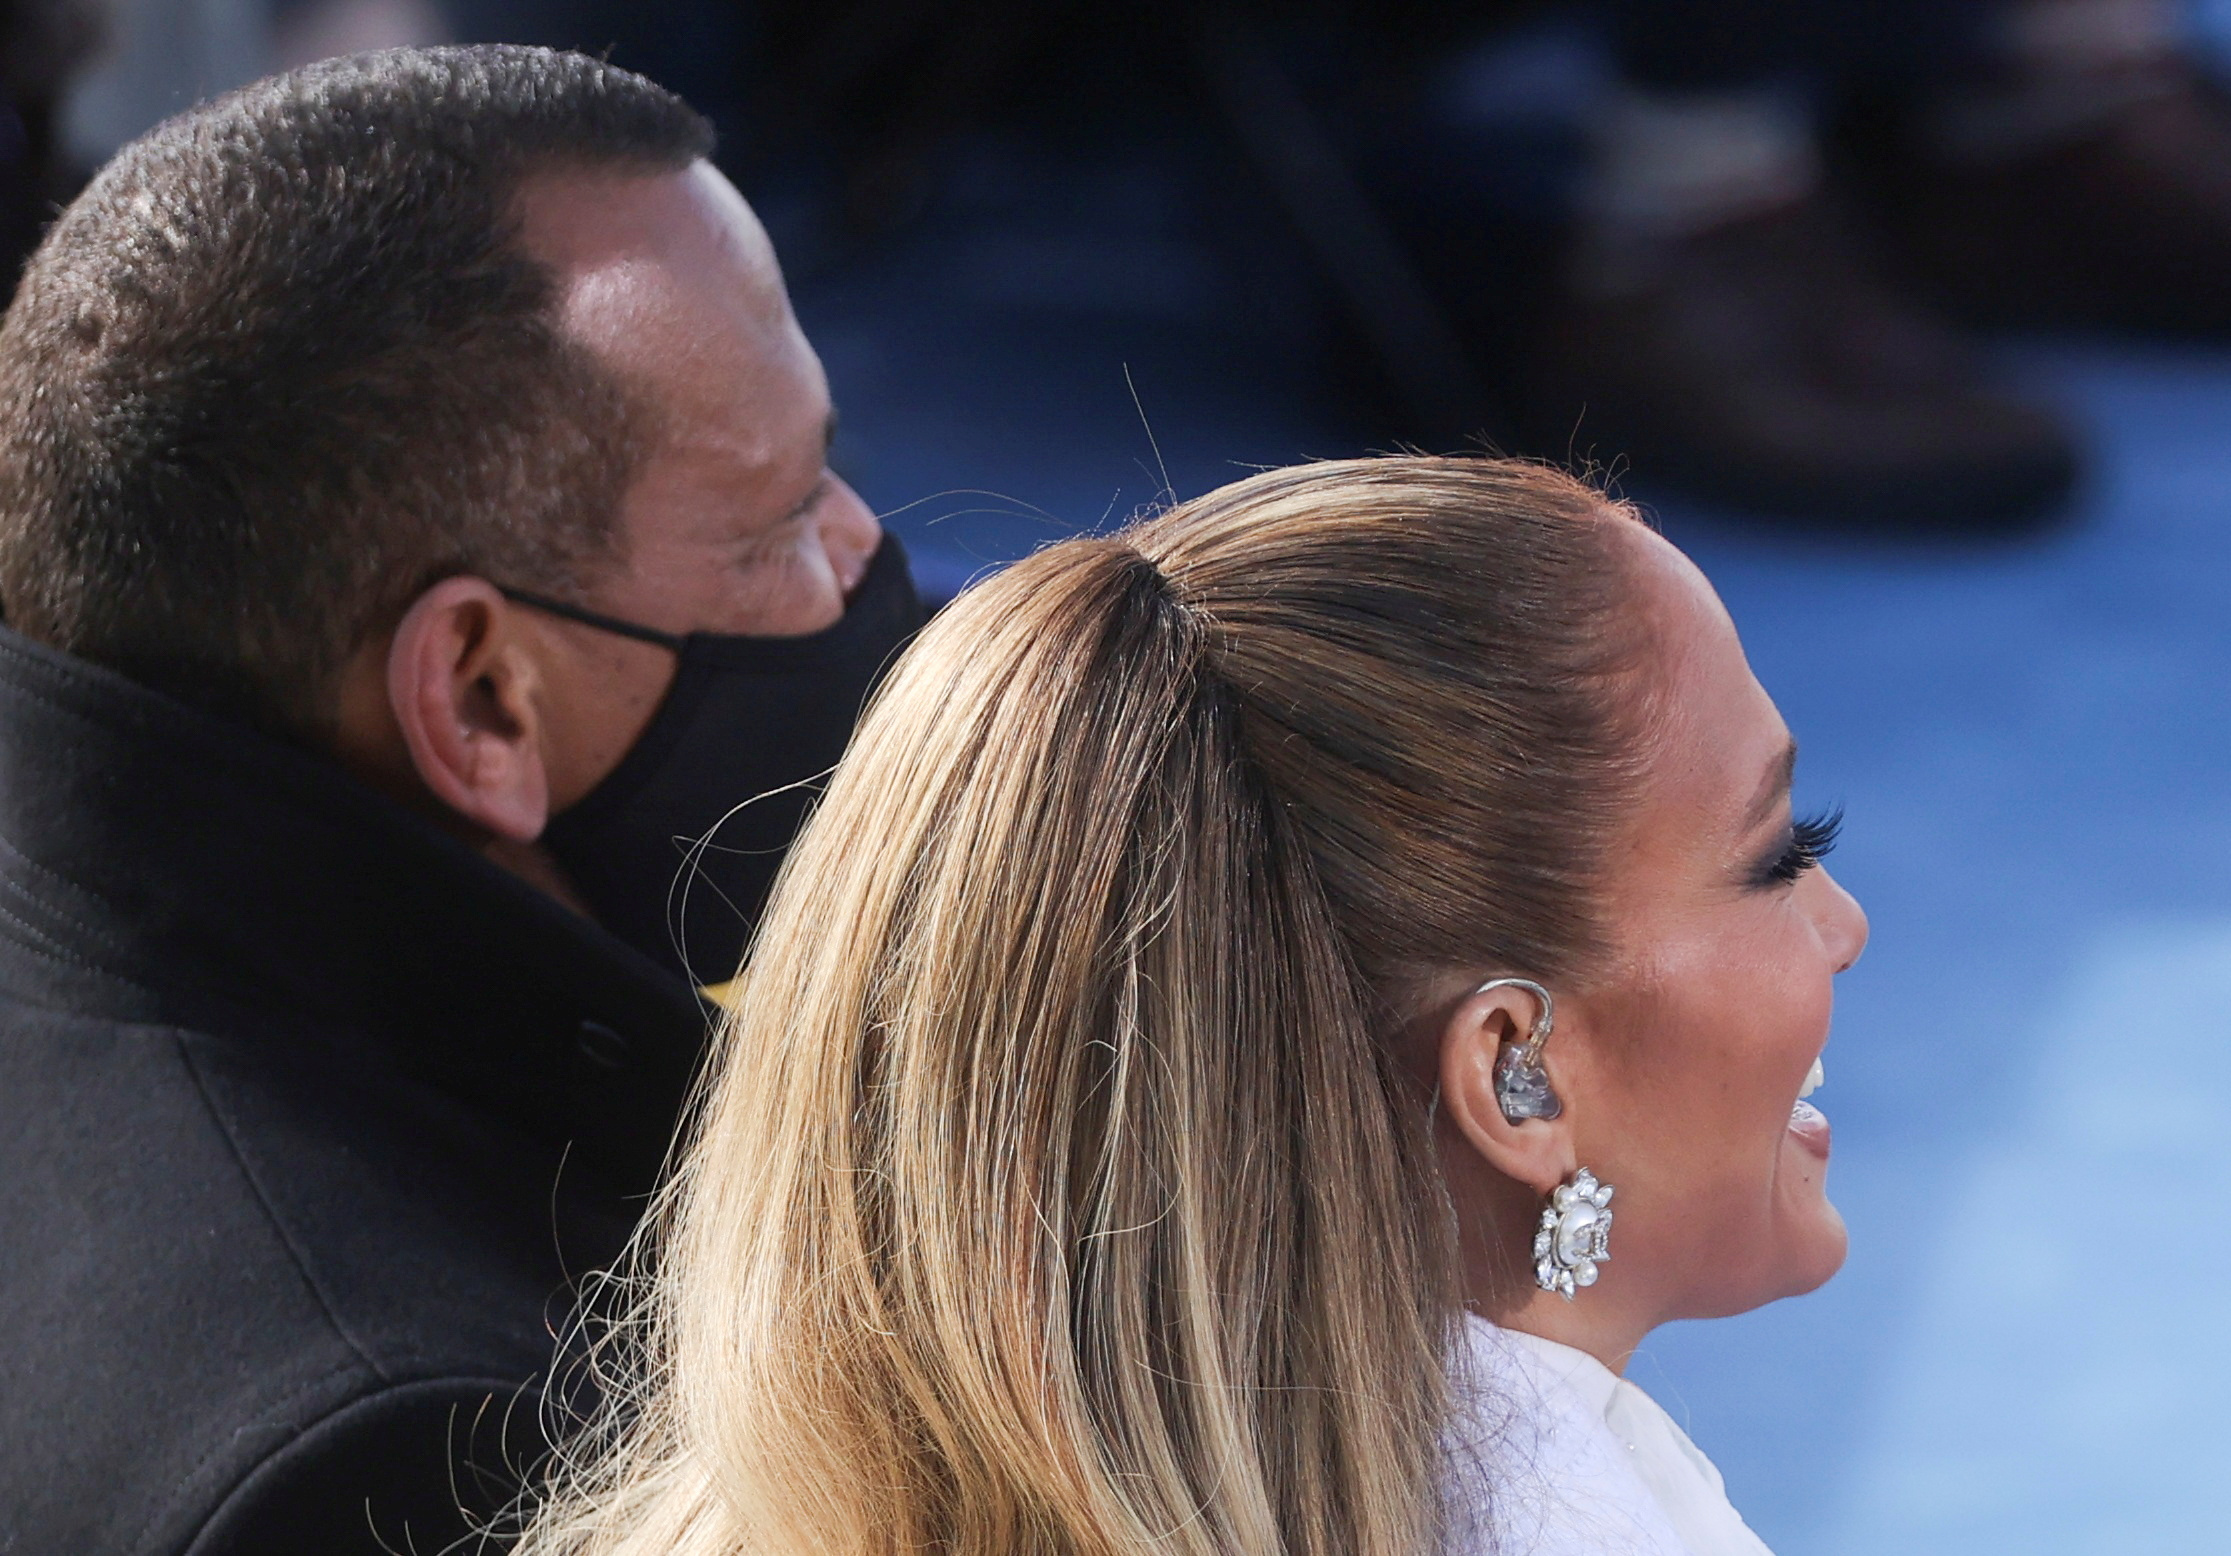 Singer Jennifer Lopez smiles next to Alex Rodriguez during the inauguration of Joe Biden as the 46th President of the United States on the West Front of the U.S. Capitol in Washington, U.S., January 20, 2021. REUTERS/Jonathan Ernst/Pool